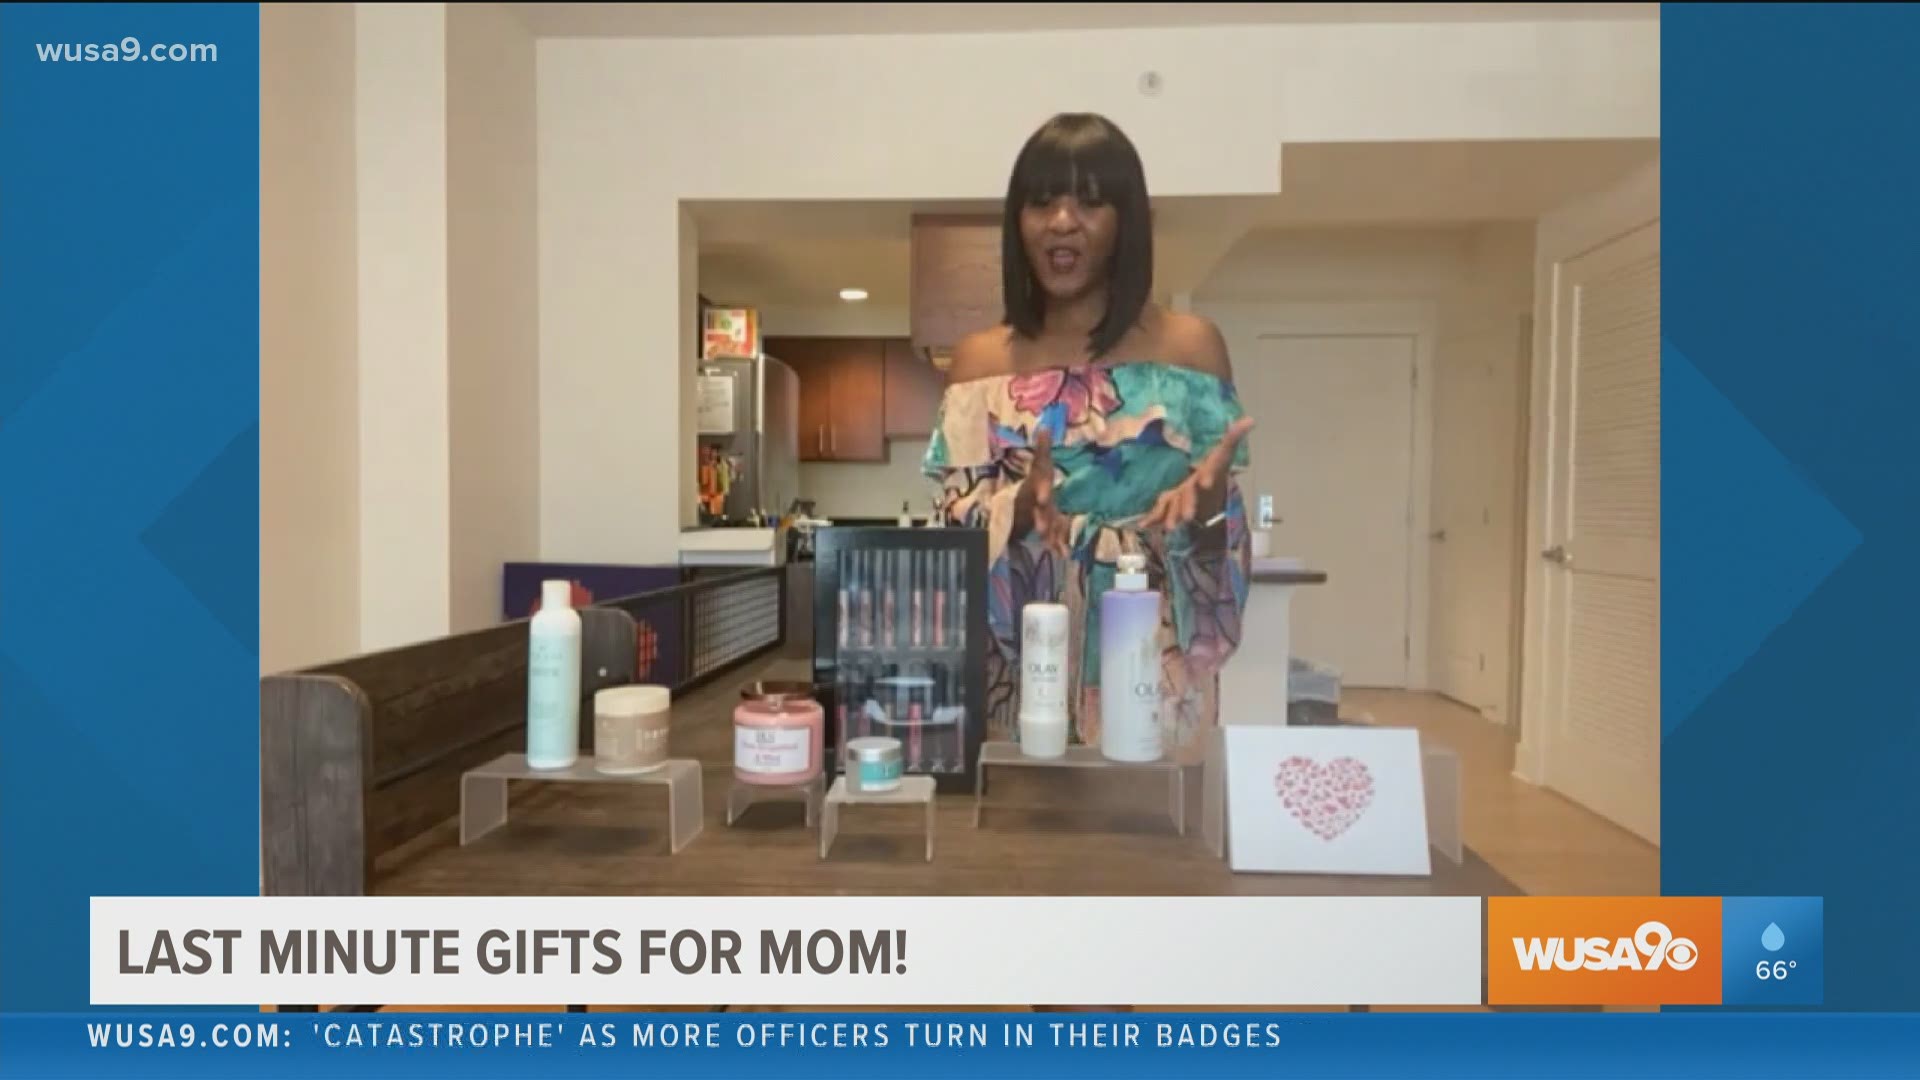 Lifestyle expert Margo Burr shares some great last minute Mother's Day gift ideas.